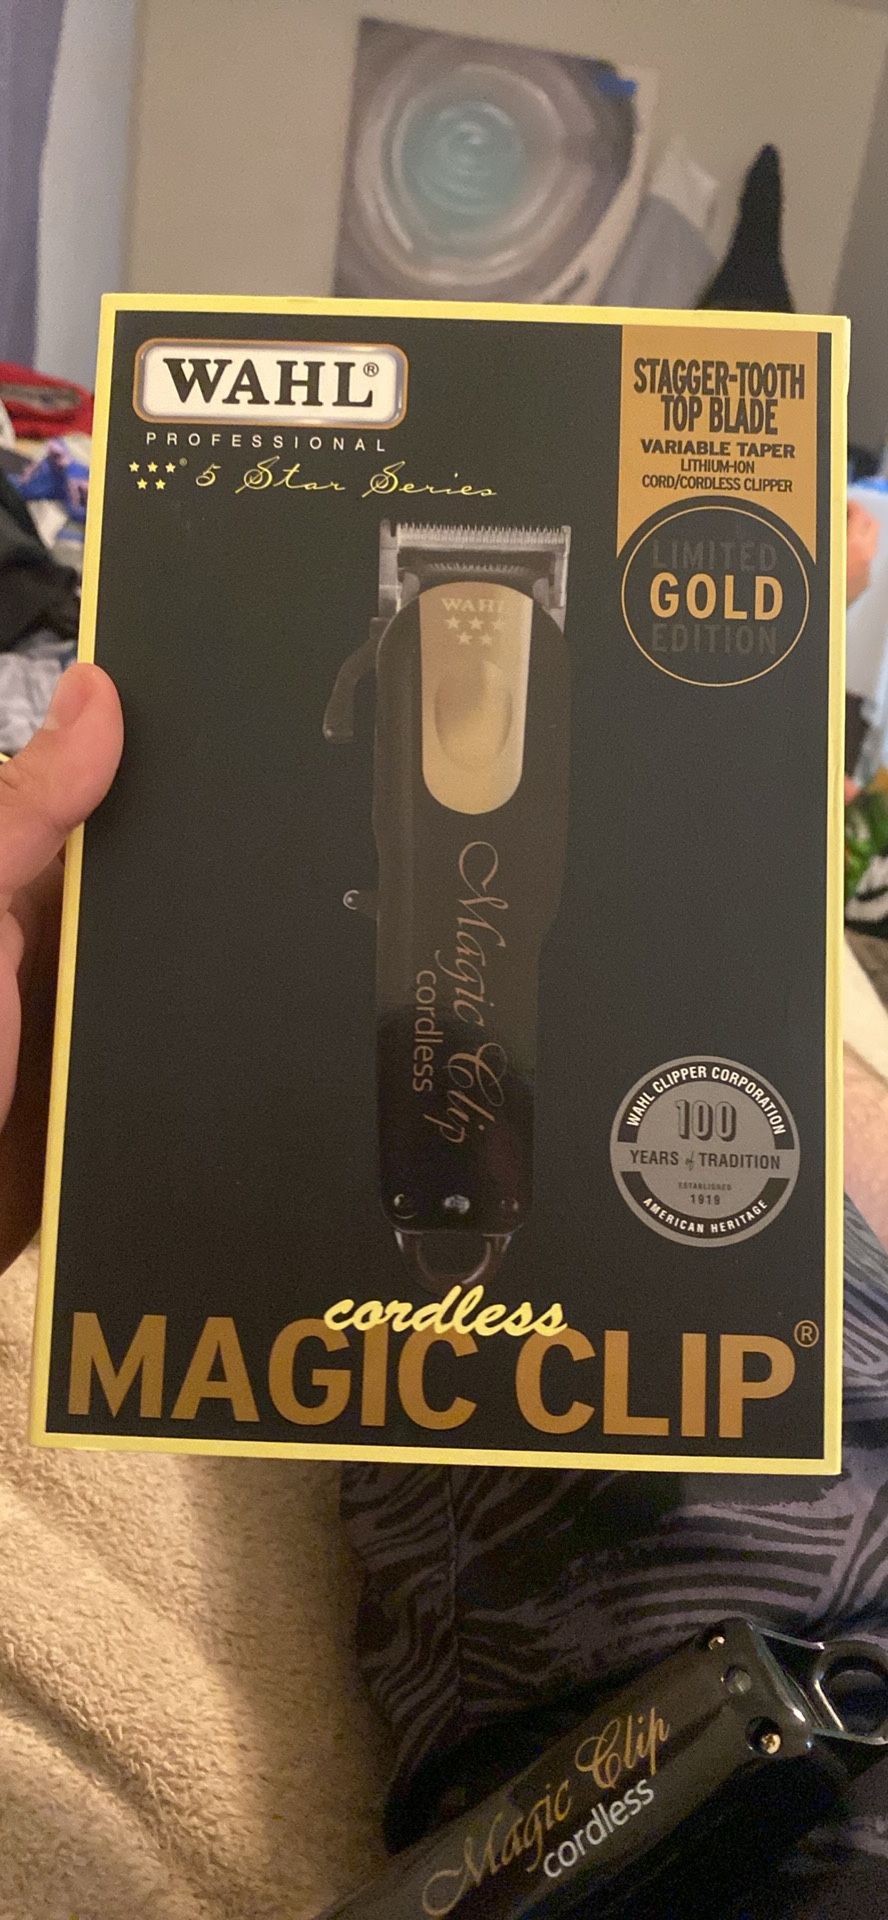 Brand new Limited GOLD edition magic clip cordless wahl 5 stars professional